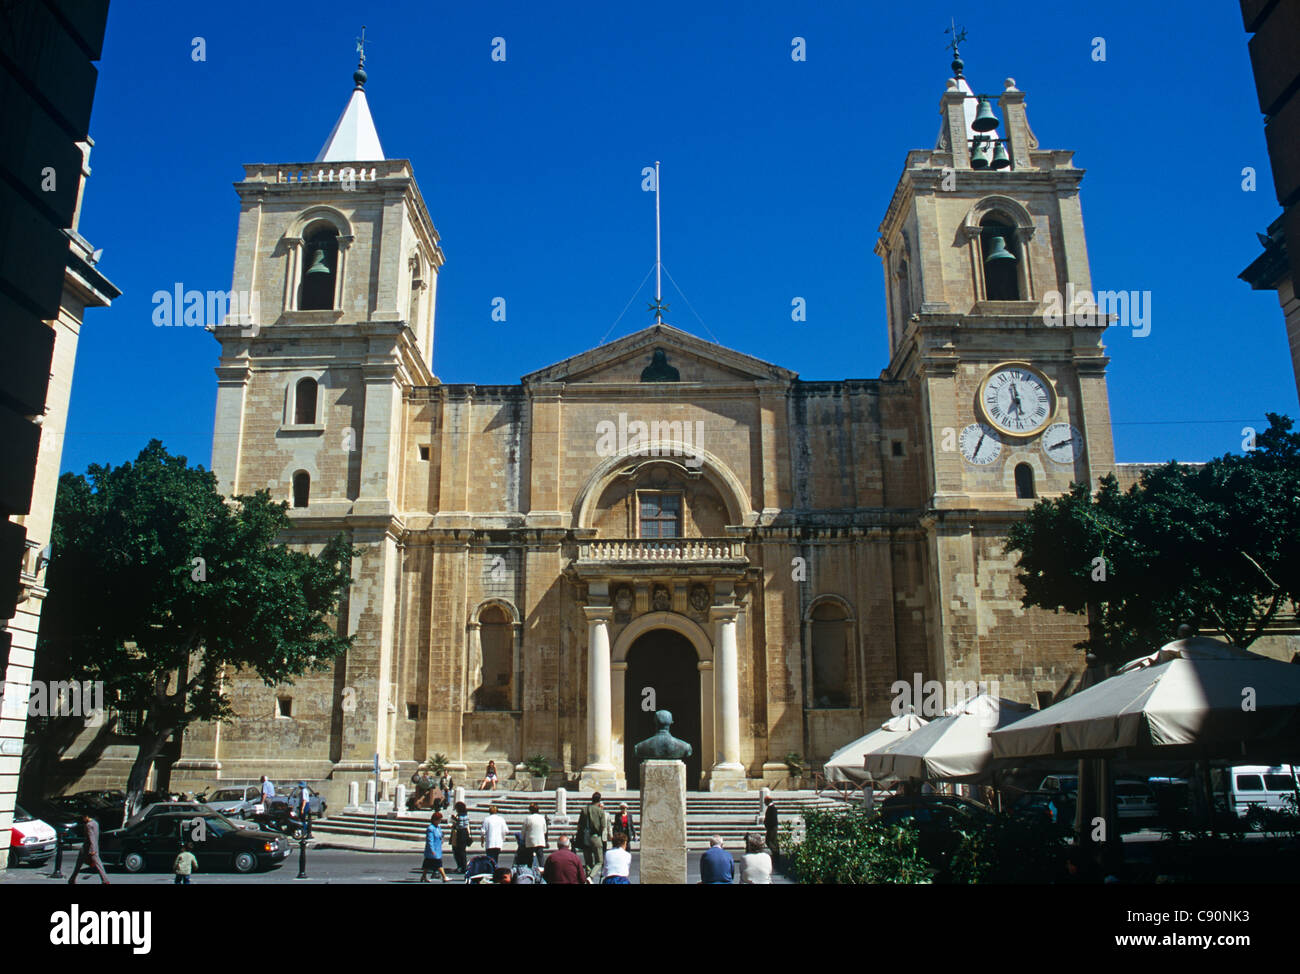 St. Johns Co-Cathedral was built by the Knights of Malta between 1573 and 1578. Valletta is the capital city of Malta. Stock Photo